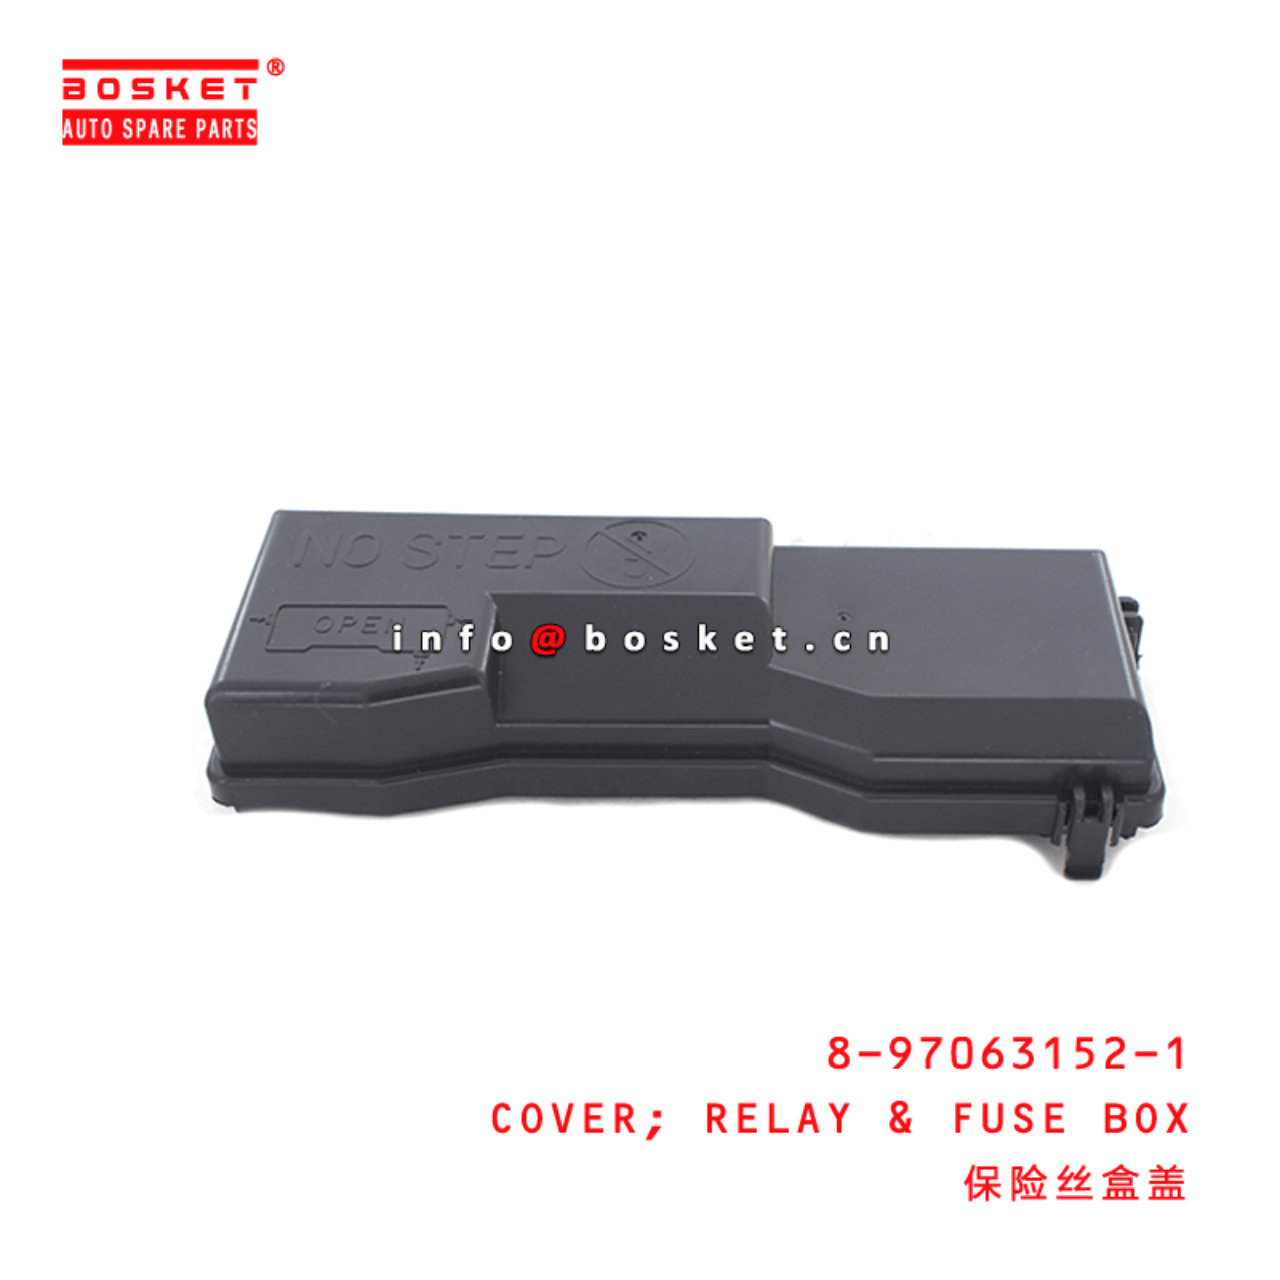  8-97063152-1 Relay And Fuse Box Cover 8970631521 Suitable for ISUZU NKR55 4JB1